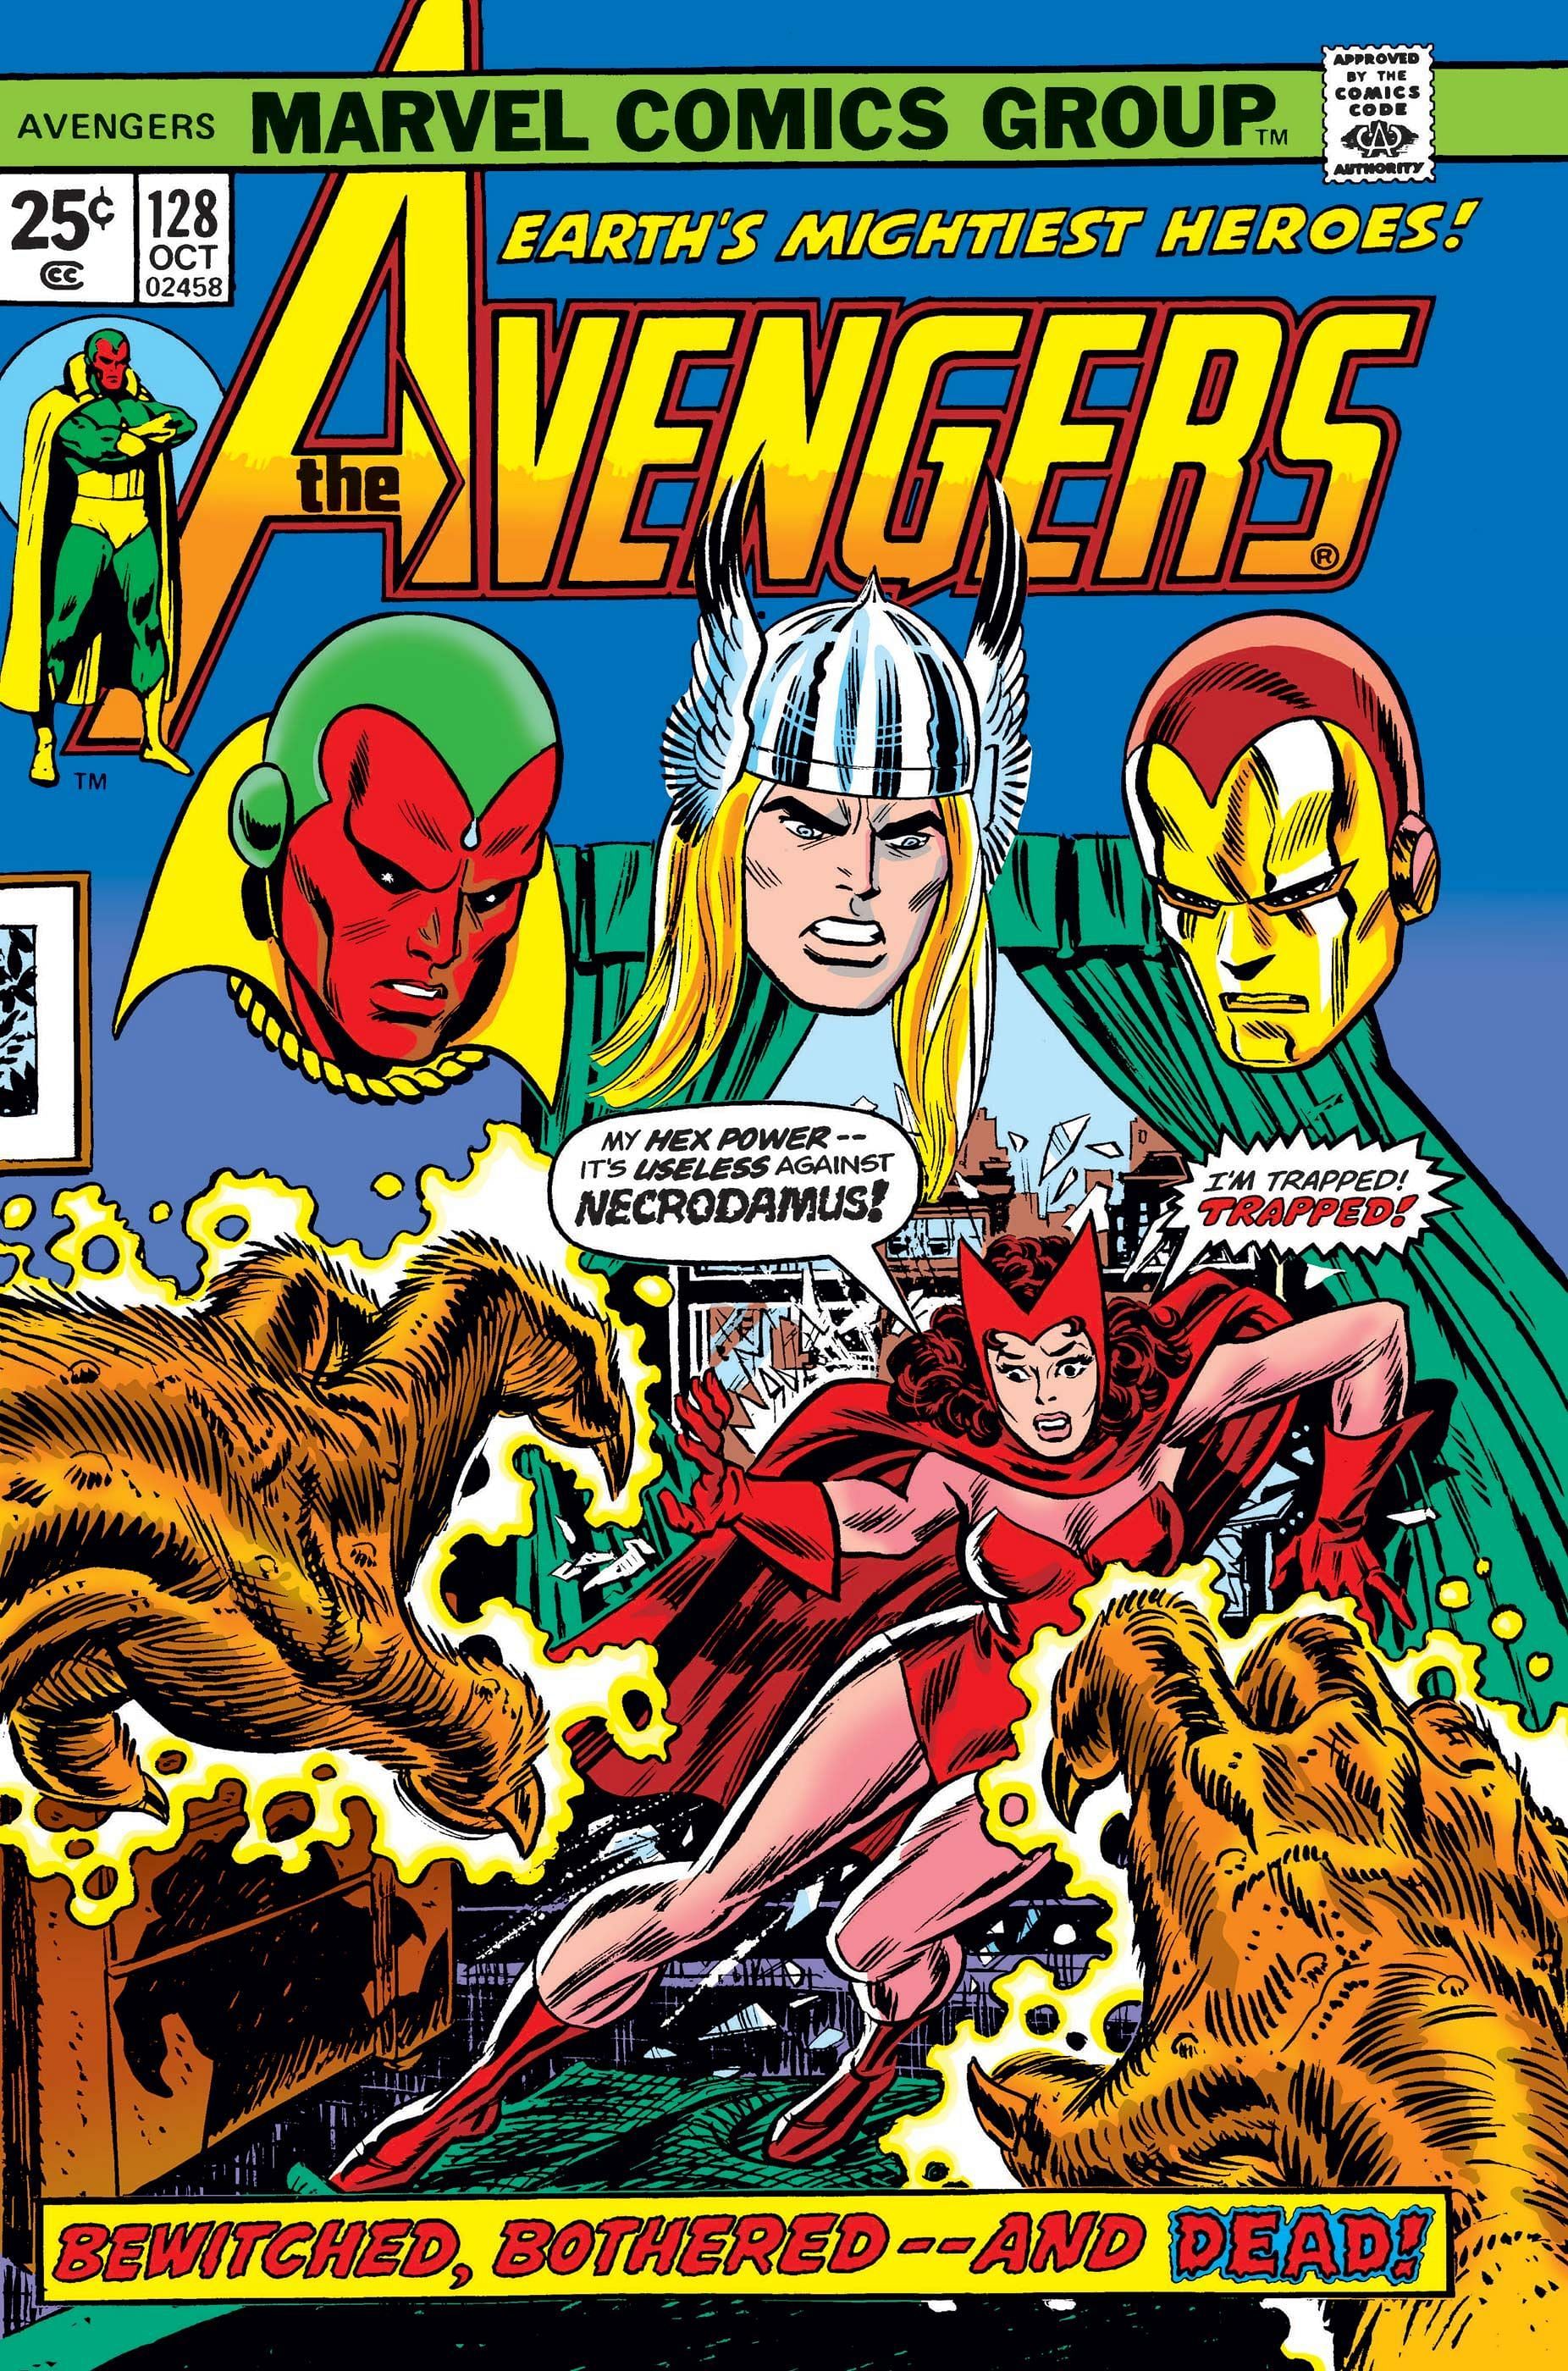 Scarlet Witch in Avengers (1963) #128 (Image via Marvel Comics)